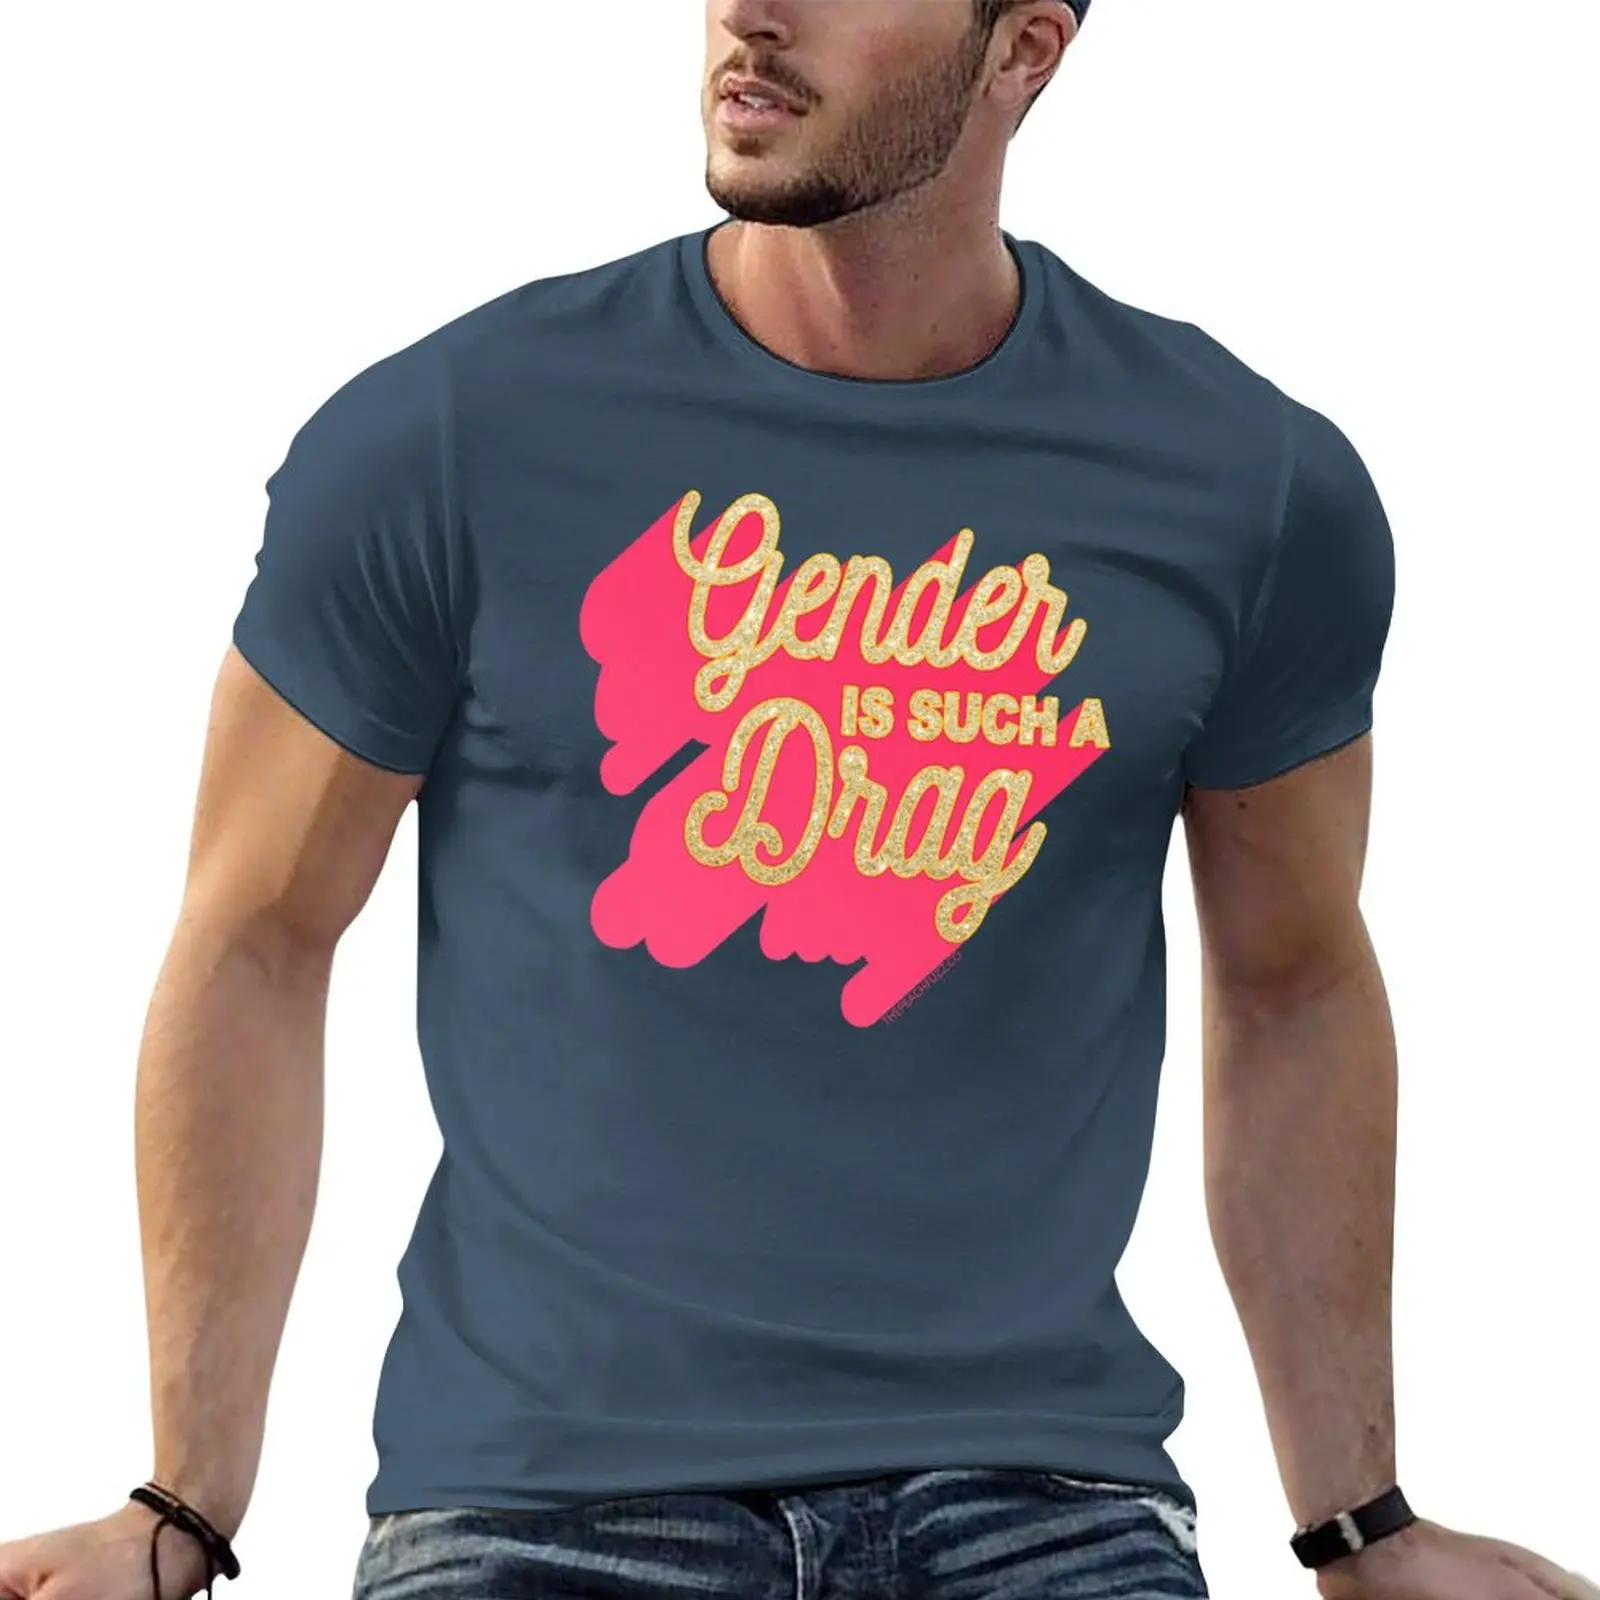 

Gender Is Such A Drag - The Peach Fuzz T-shirt quick-drying anime funnys customs design your own mens funny t shirts